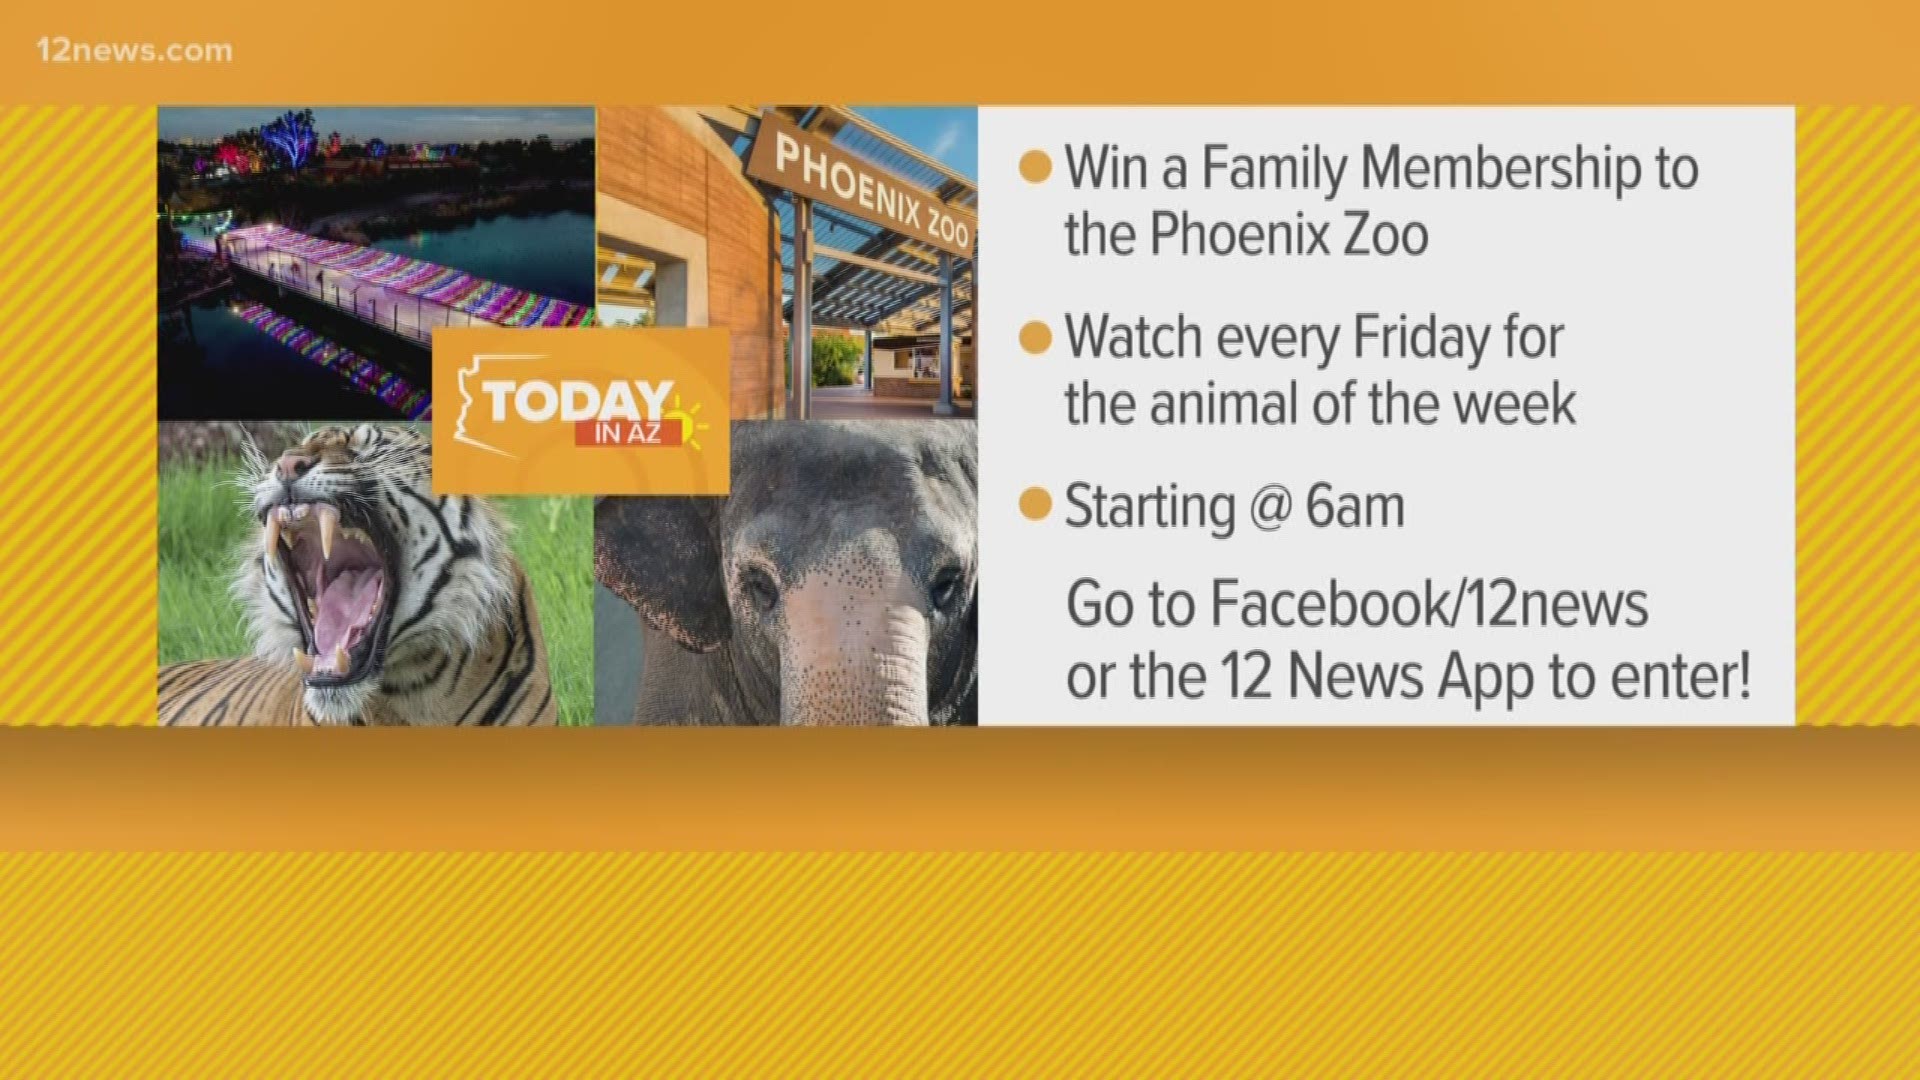 Here's how the animals are staying warm at the Phoenix Zoo. Enter to win a family membership on our Facebook page or our app.